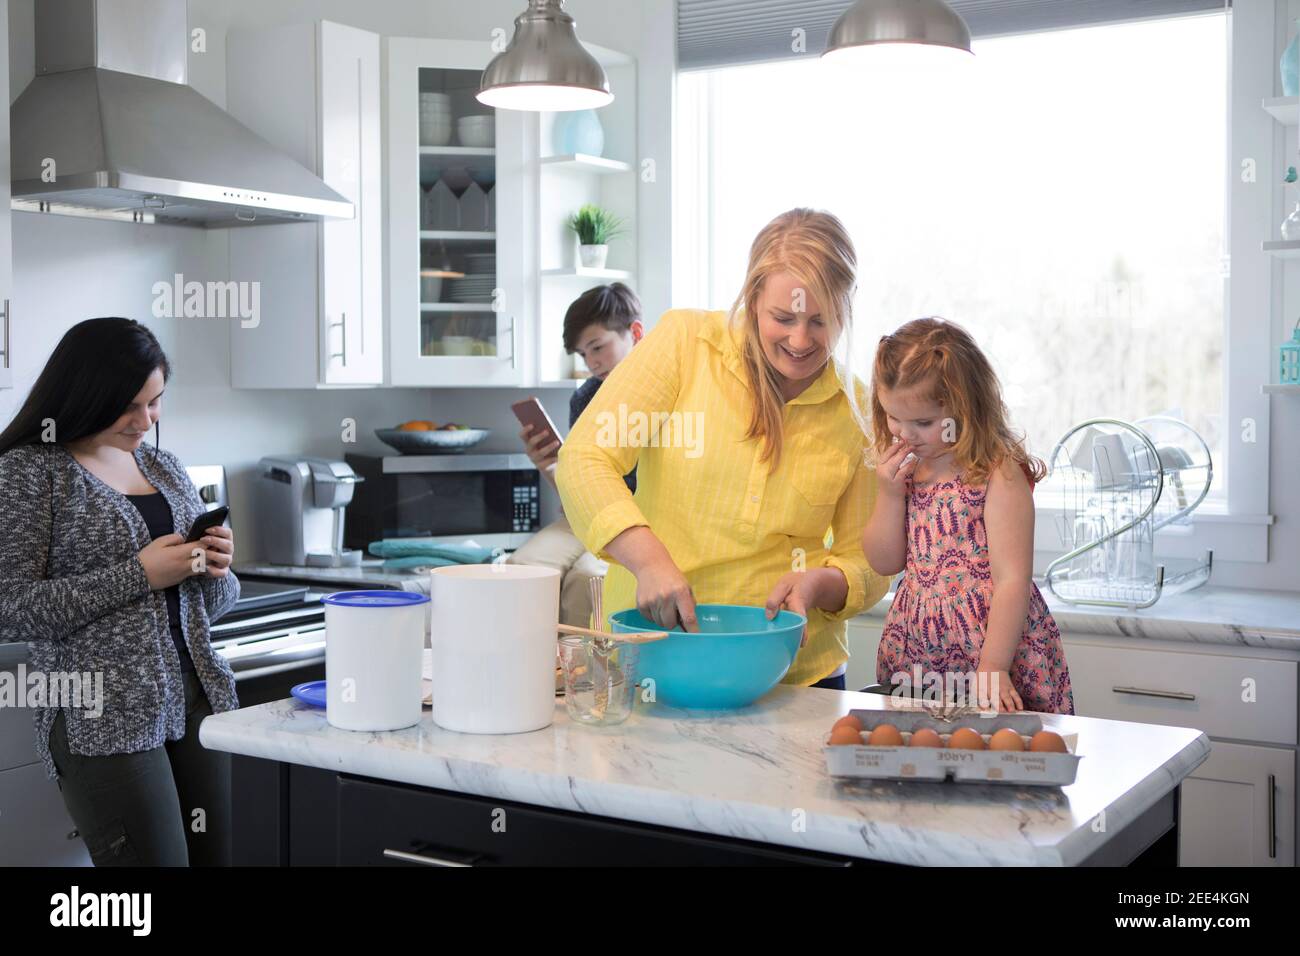 A mom and toddler daughter bake together while the teenage siblings text on their phones. Stock Photo